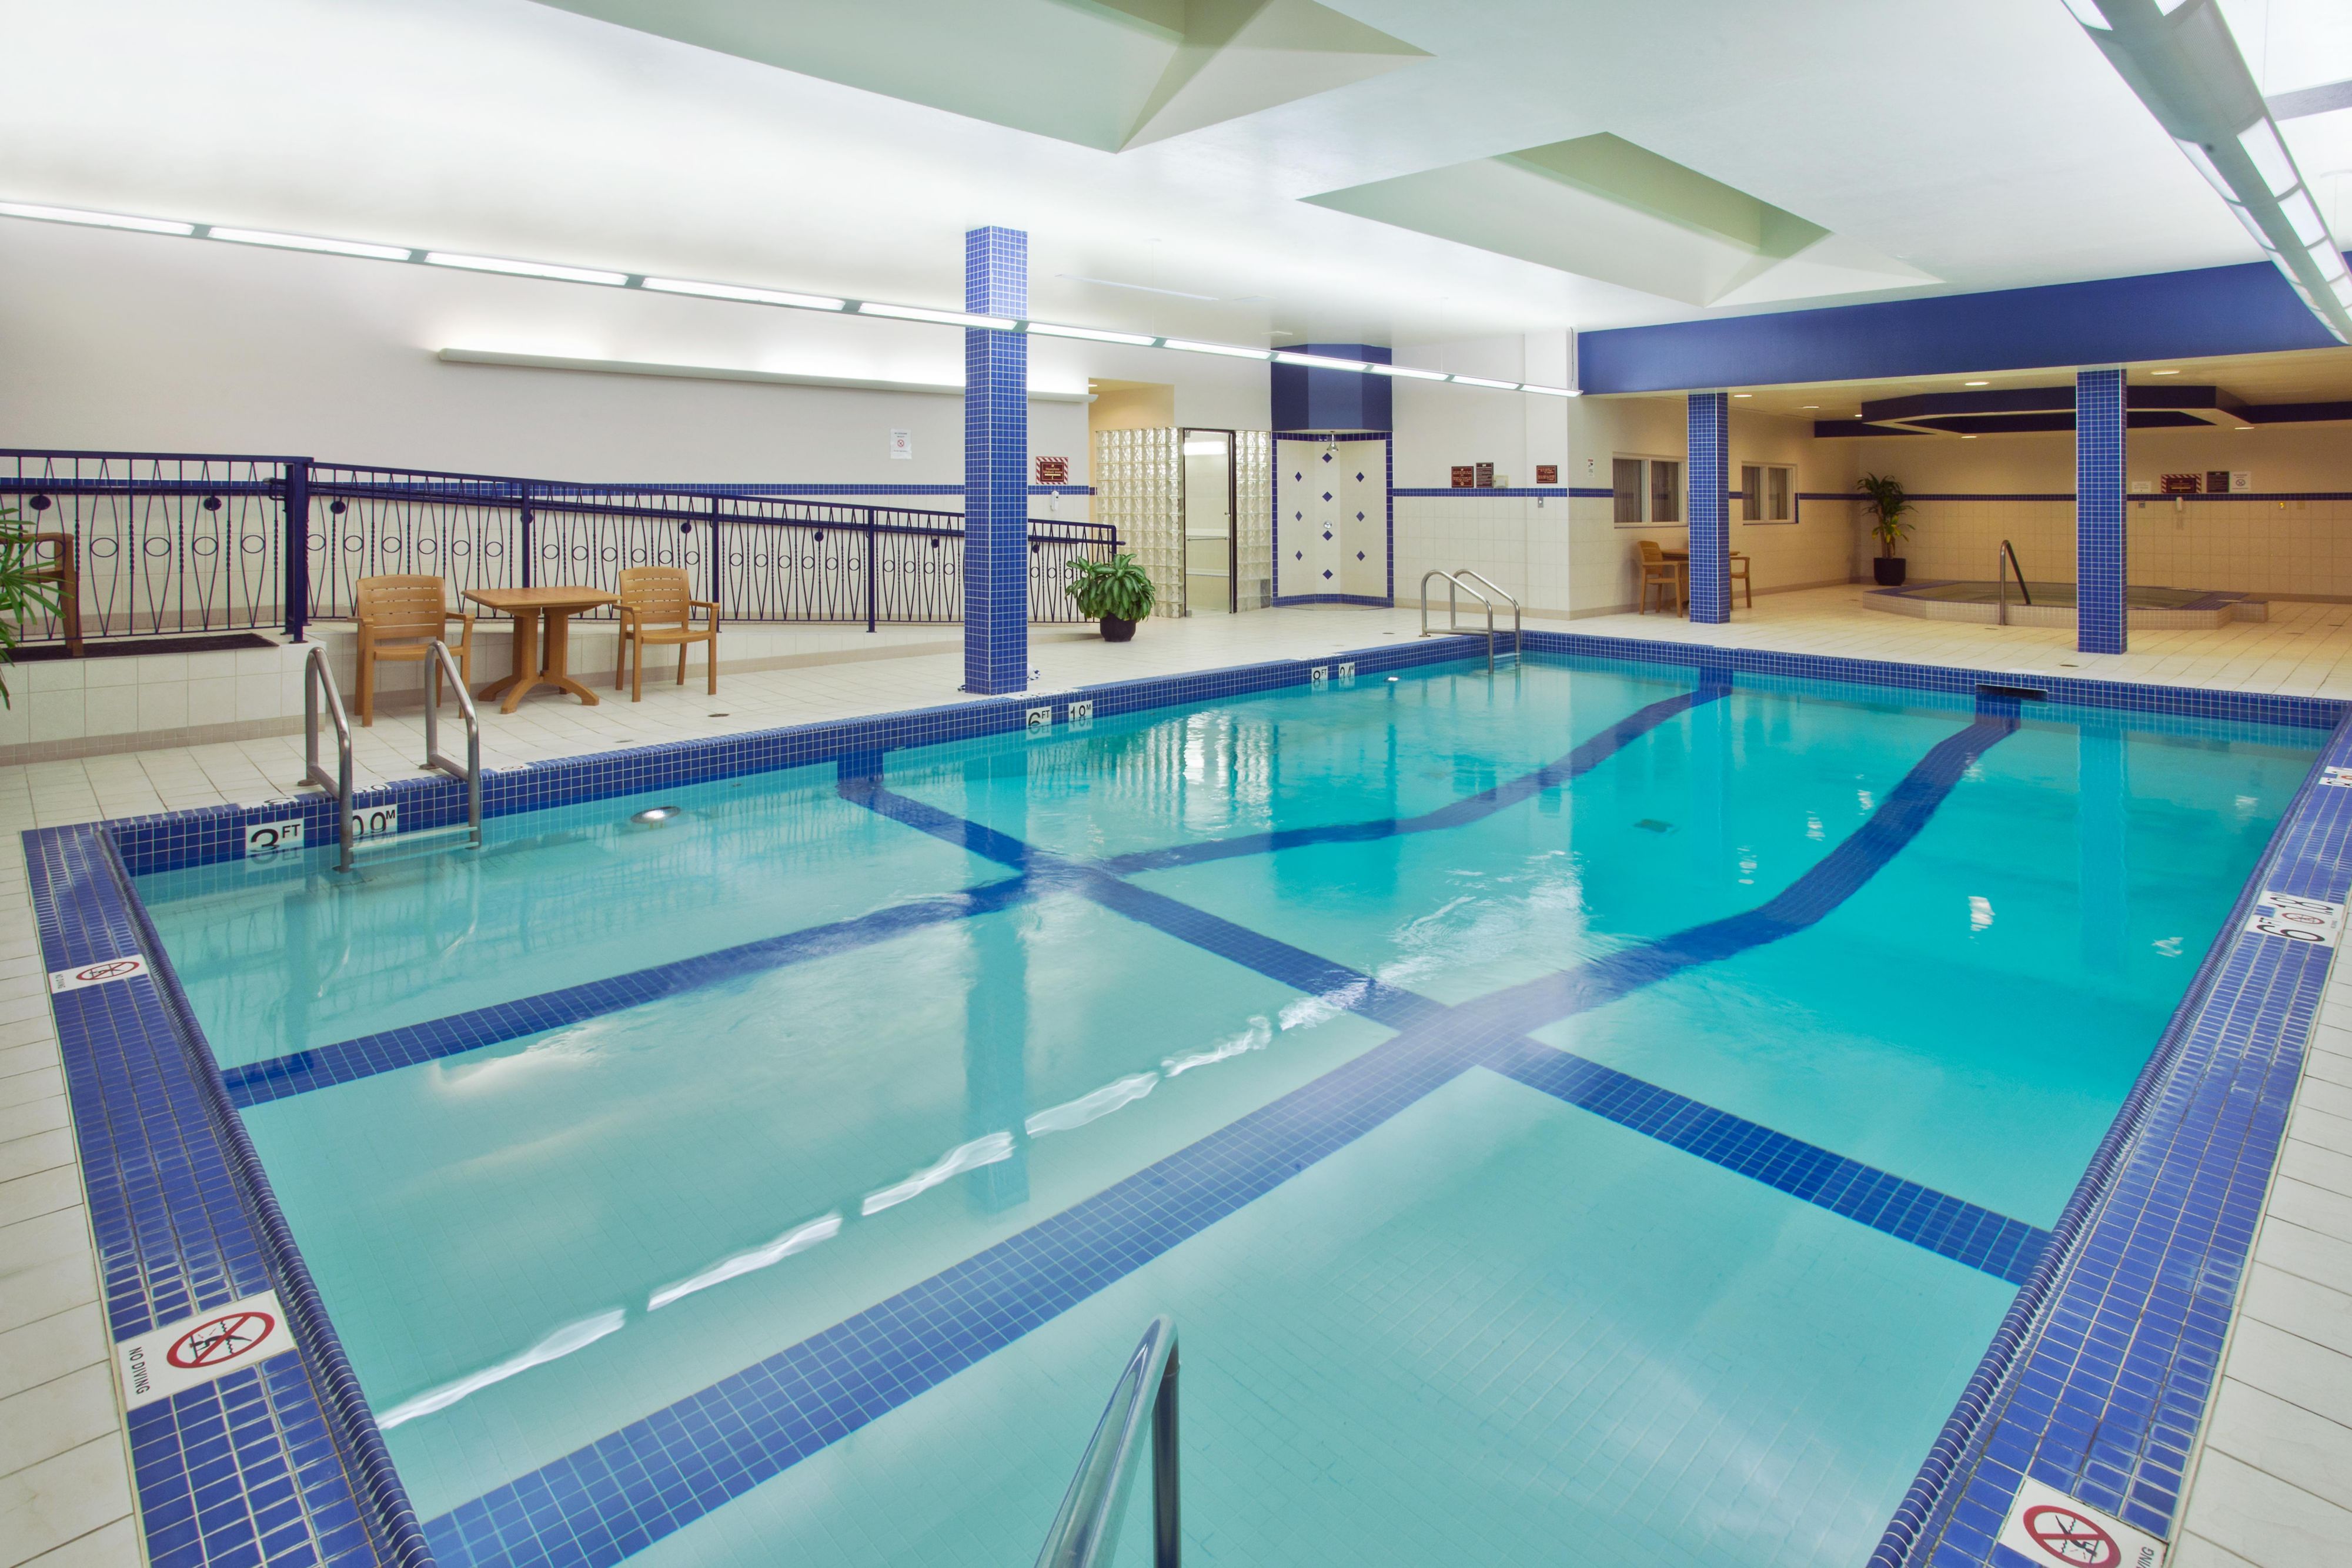 Have a morning or afternoon dip in our indoor swimming pool